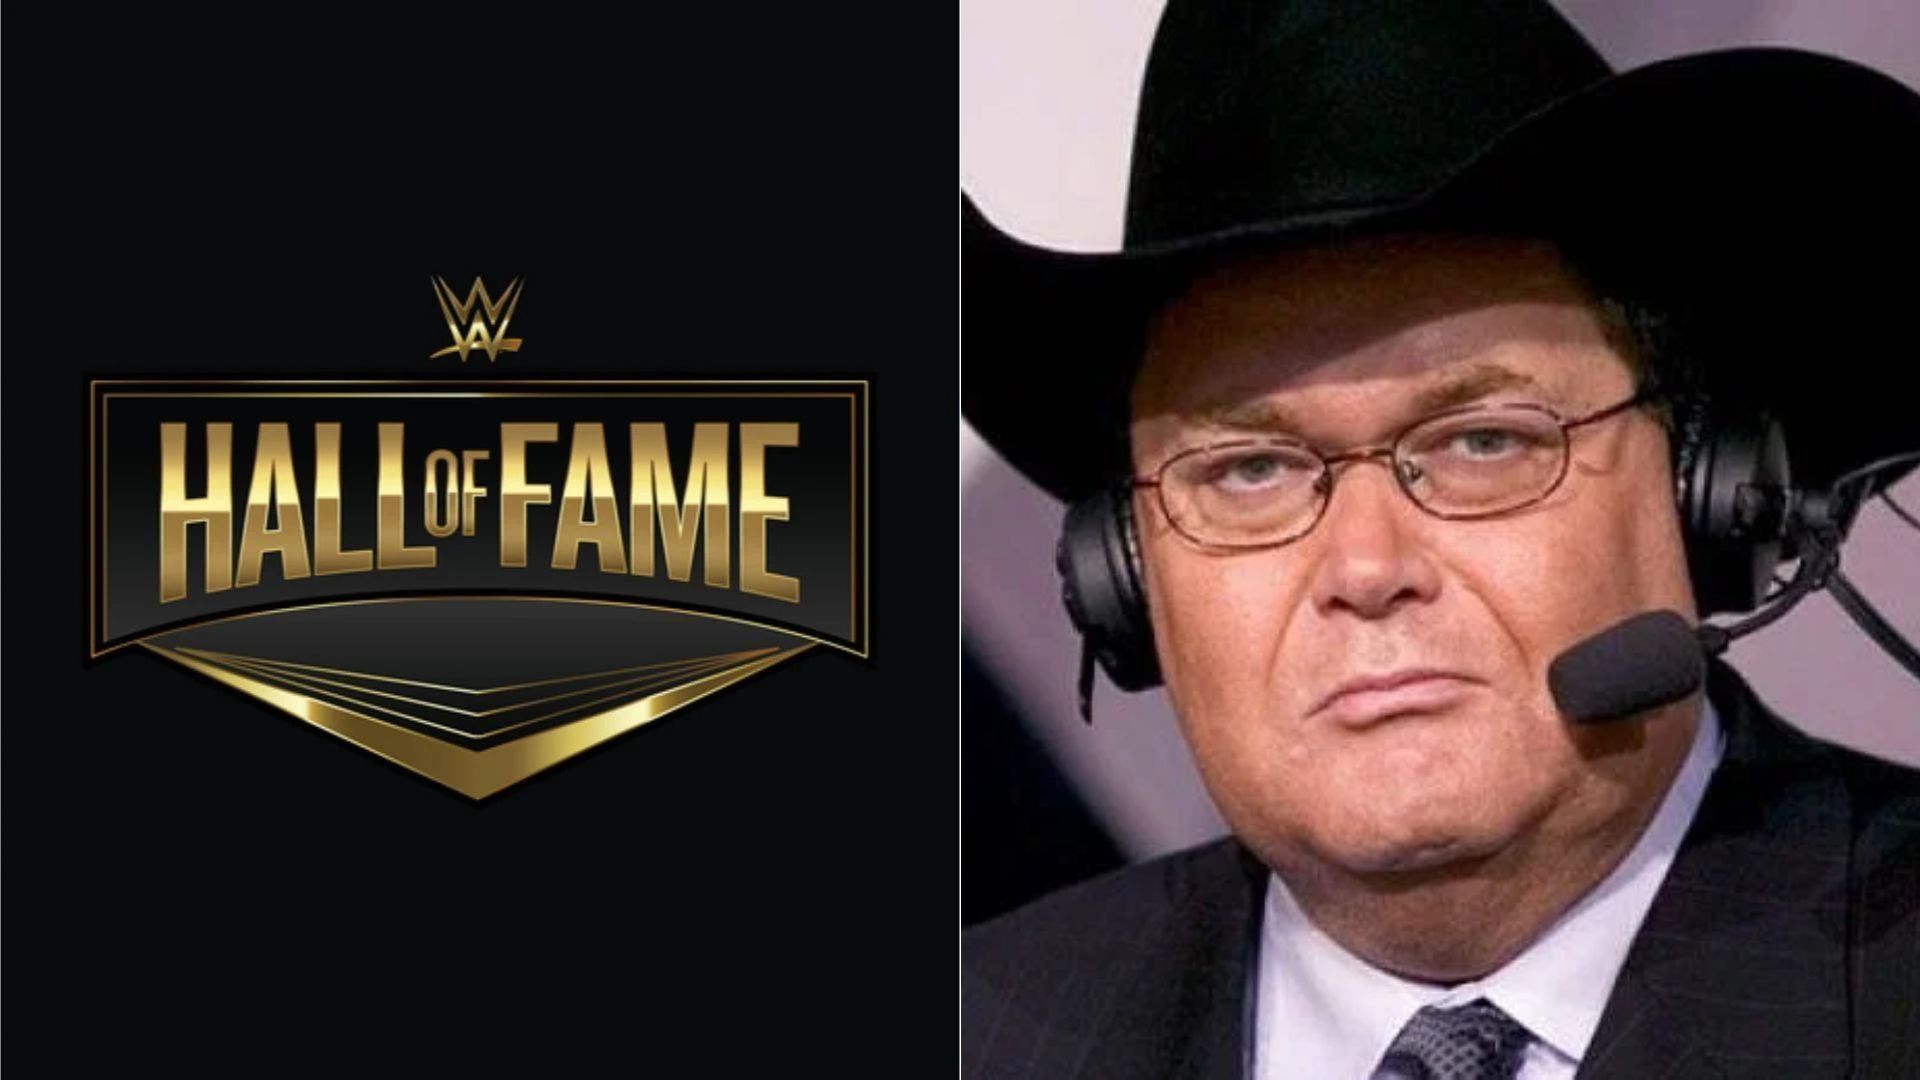 Jim Ross joined the WWE Hall of Fame in 2007